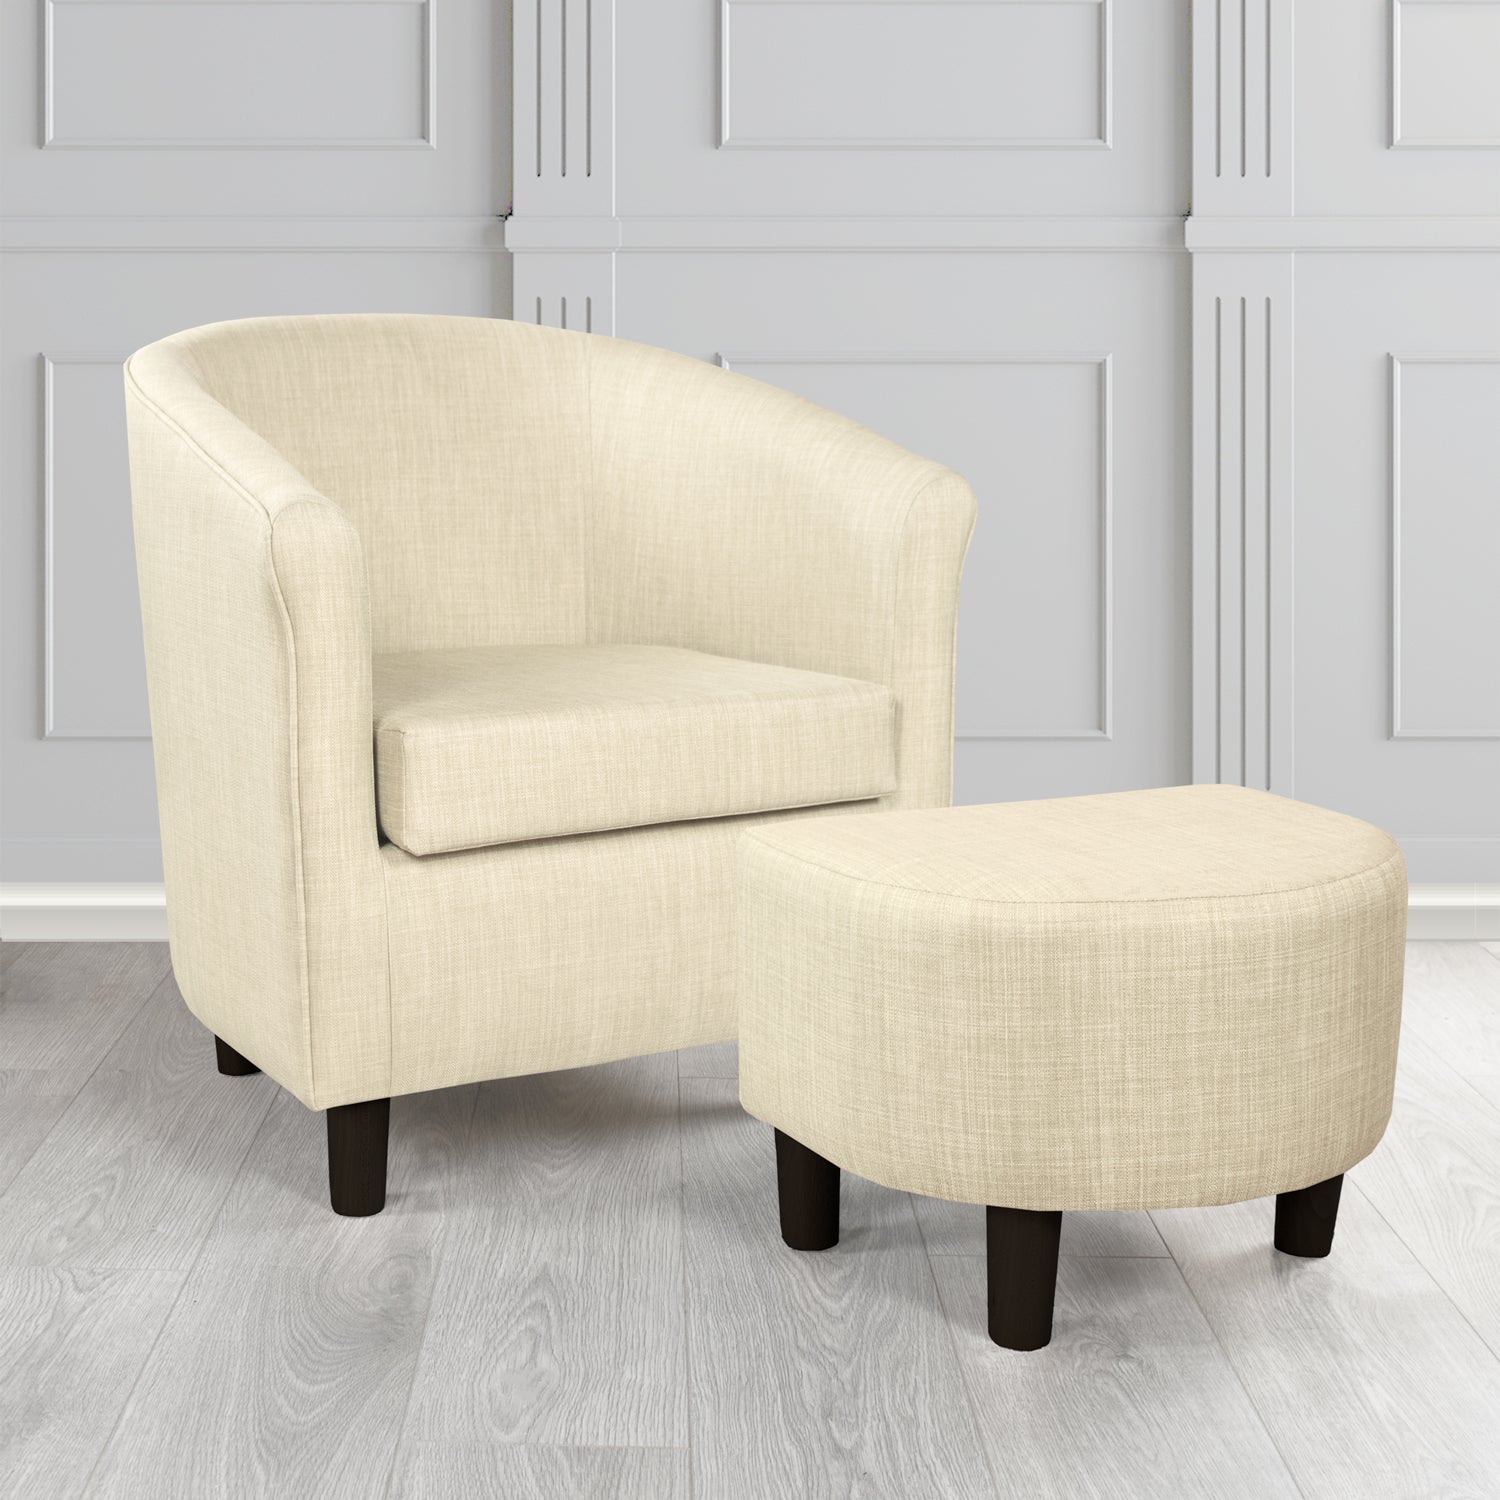 Tuscany Charles Cream Linen Plain Fabric Tub Chair with Dee Footstool Set - The Tub Chair Shop